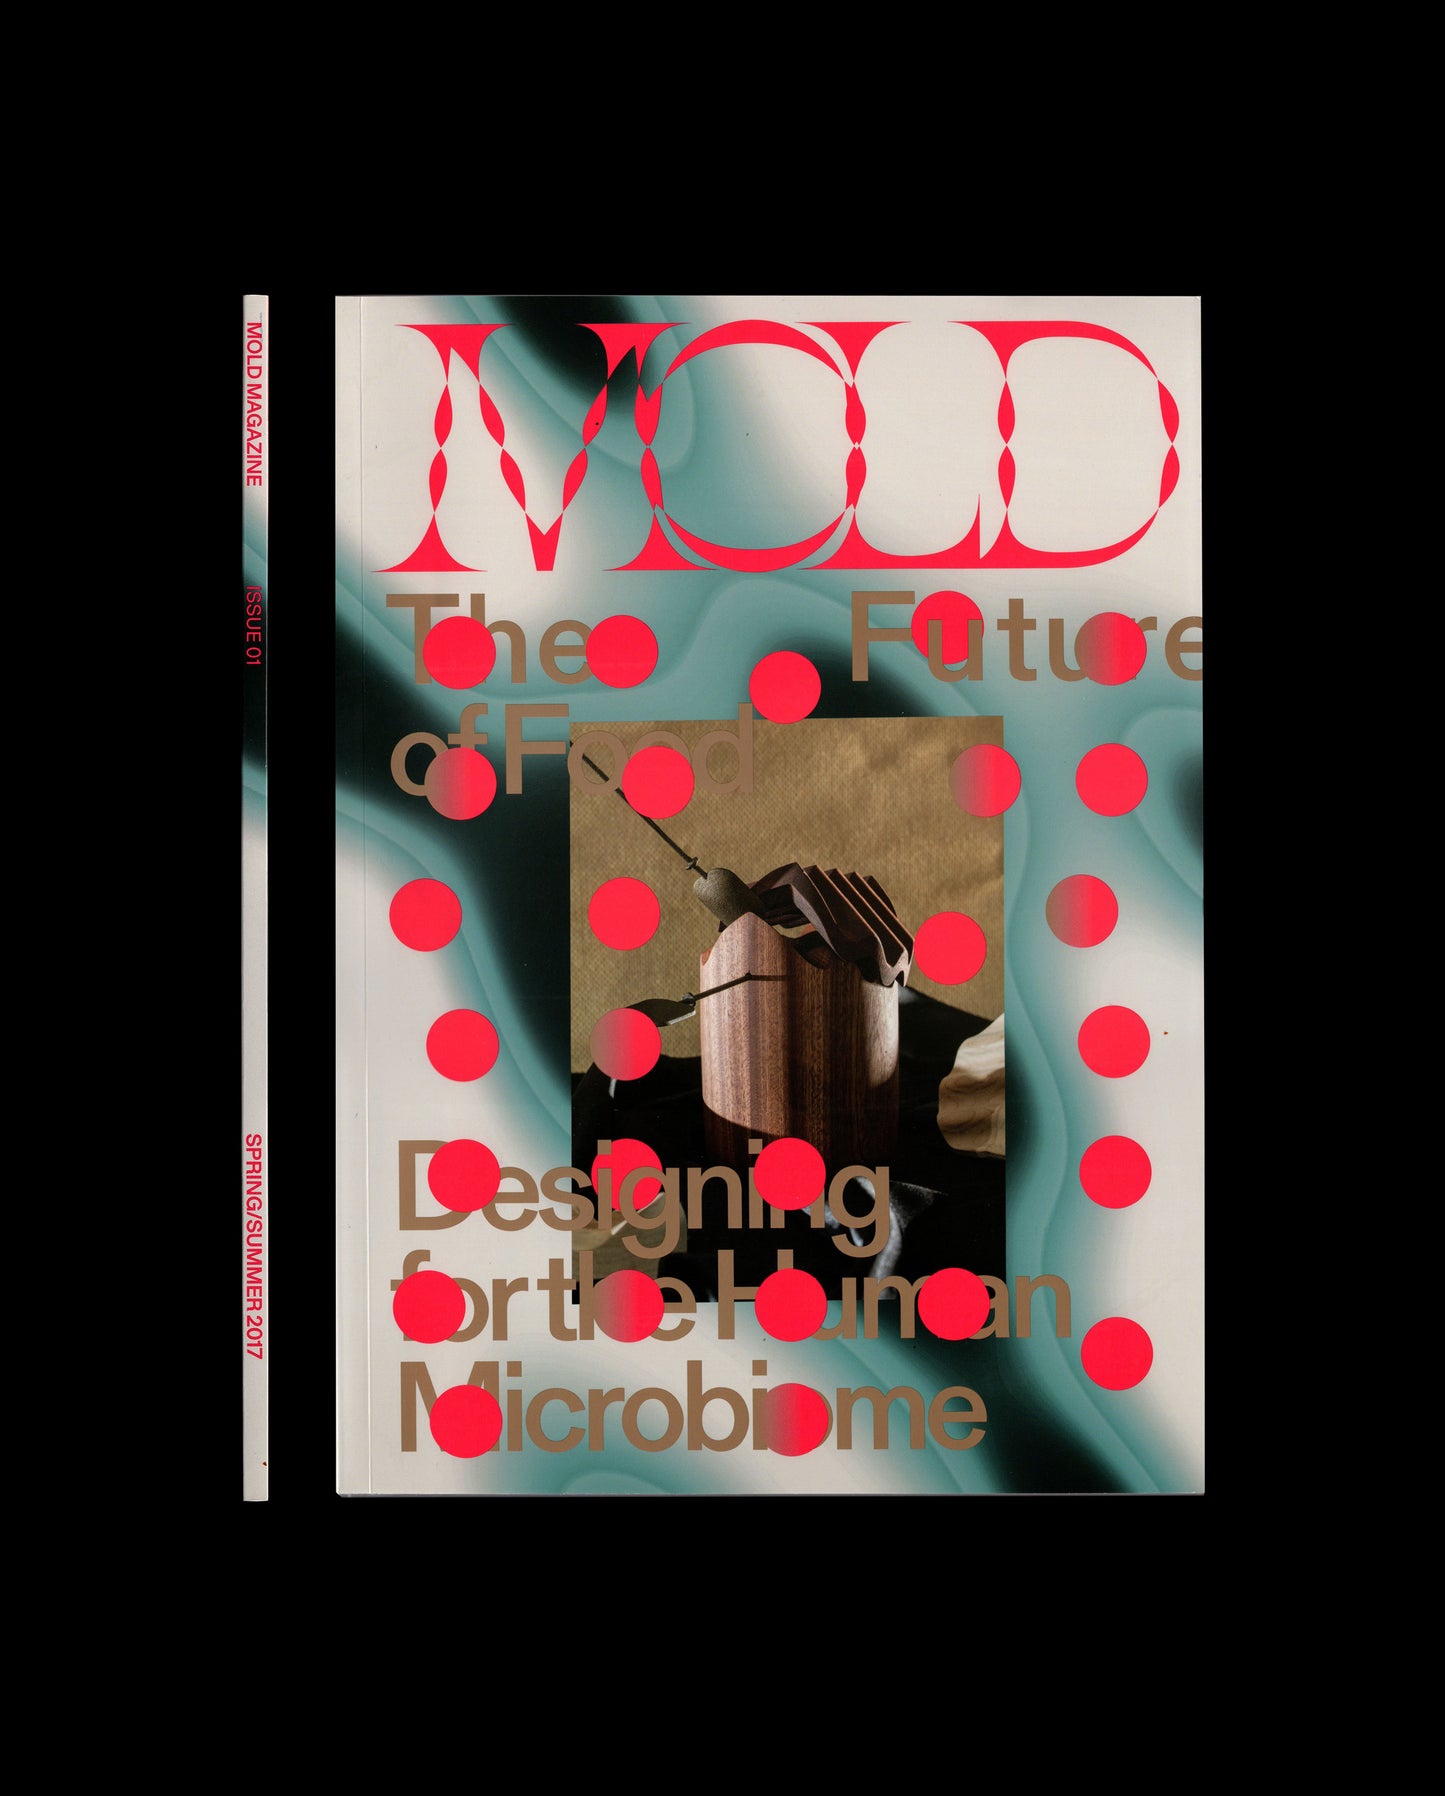 MOLD Issue 01: Designing for the Human Microbiome